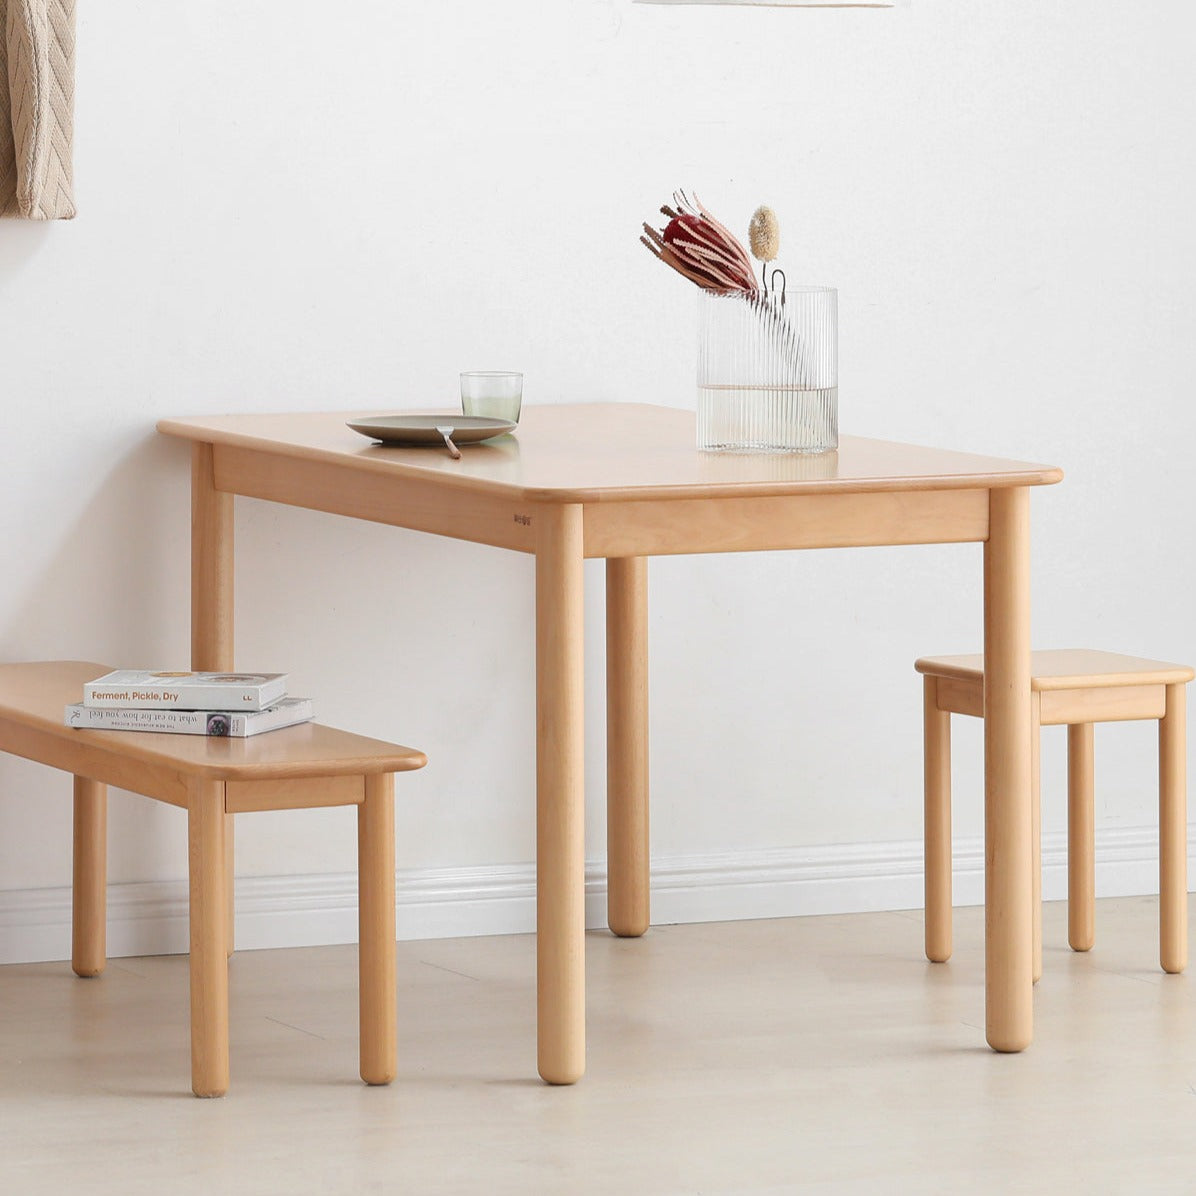 Beech solid wood dining table "